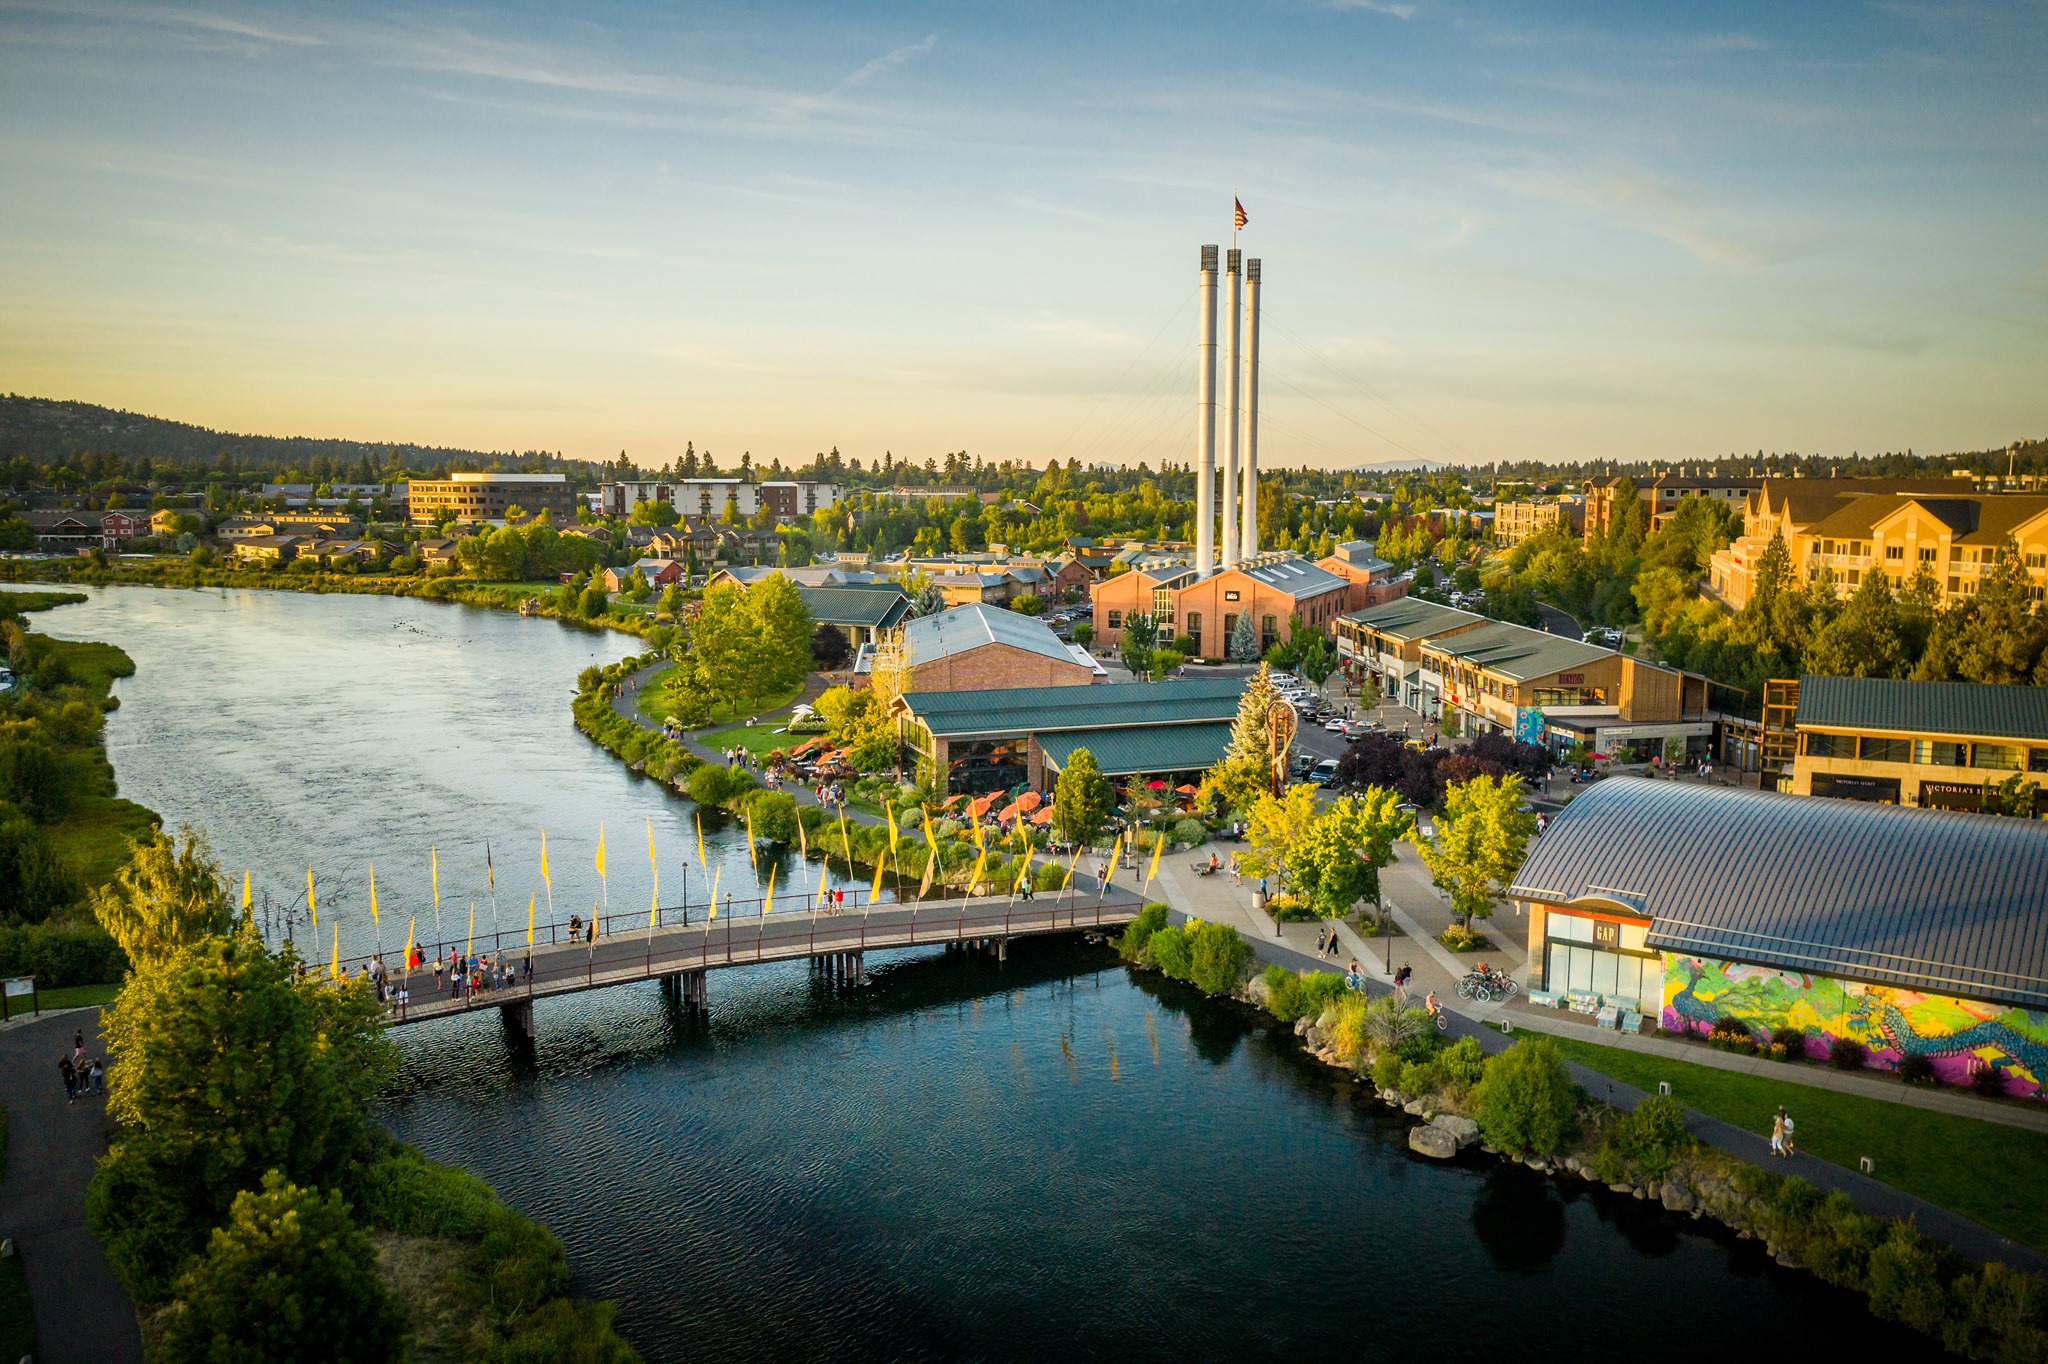 This Walkable Stretch Of Restaurants And Shops In Bend Is A Perfect Day Trip Destination